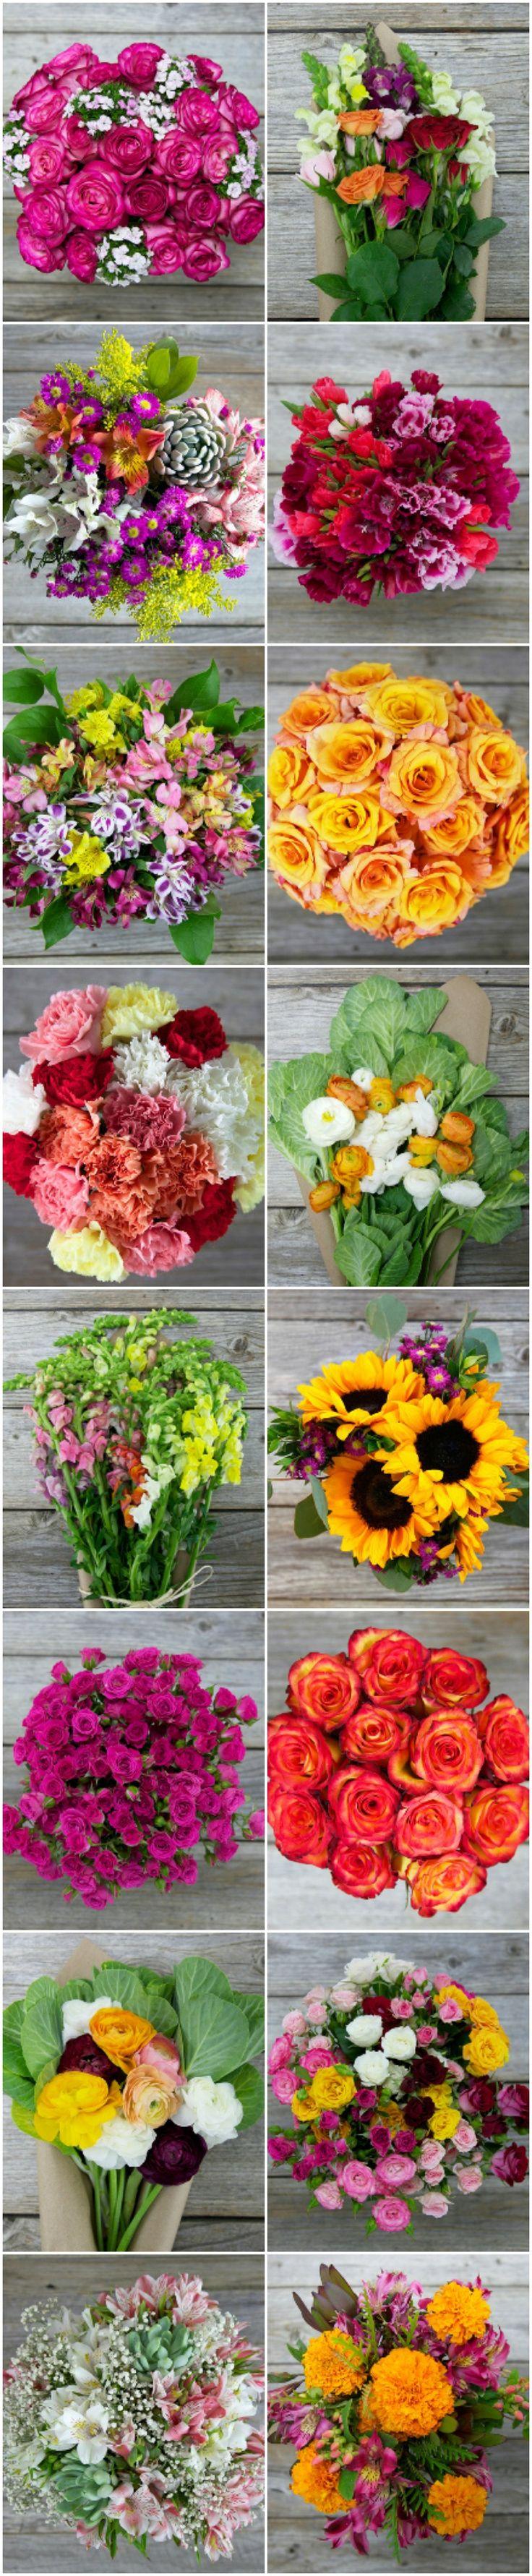 Wedding - Vibrant, Eco-friendly Flowers For Your Wedding From The Bouqs